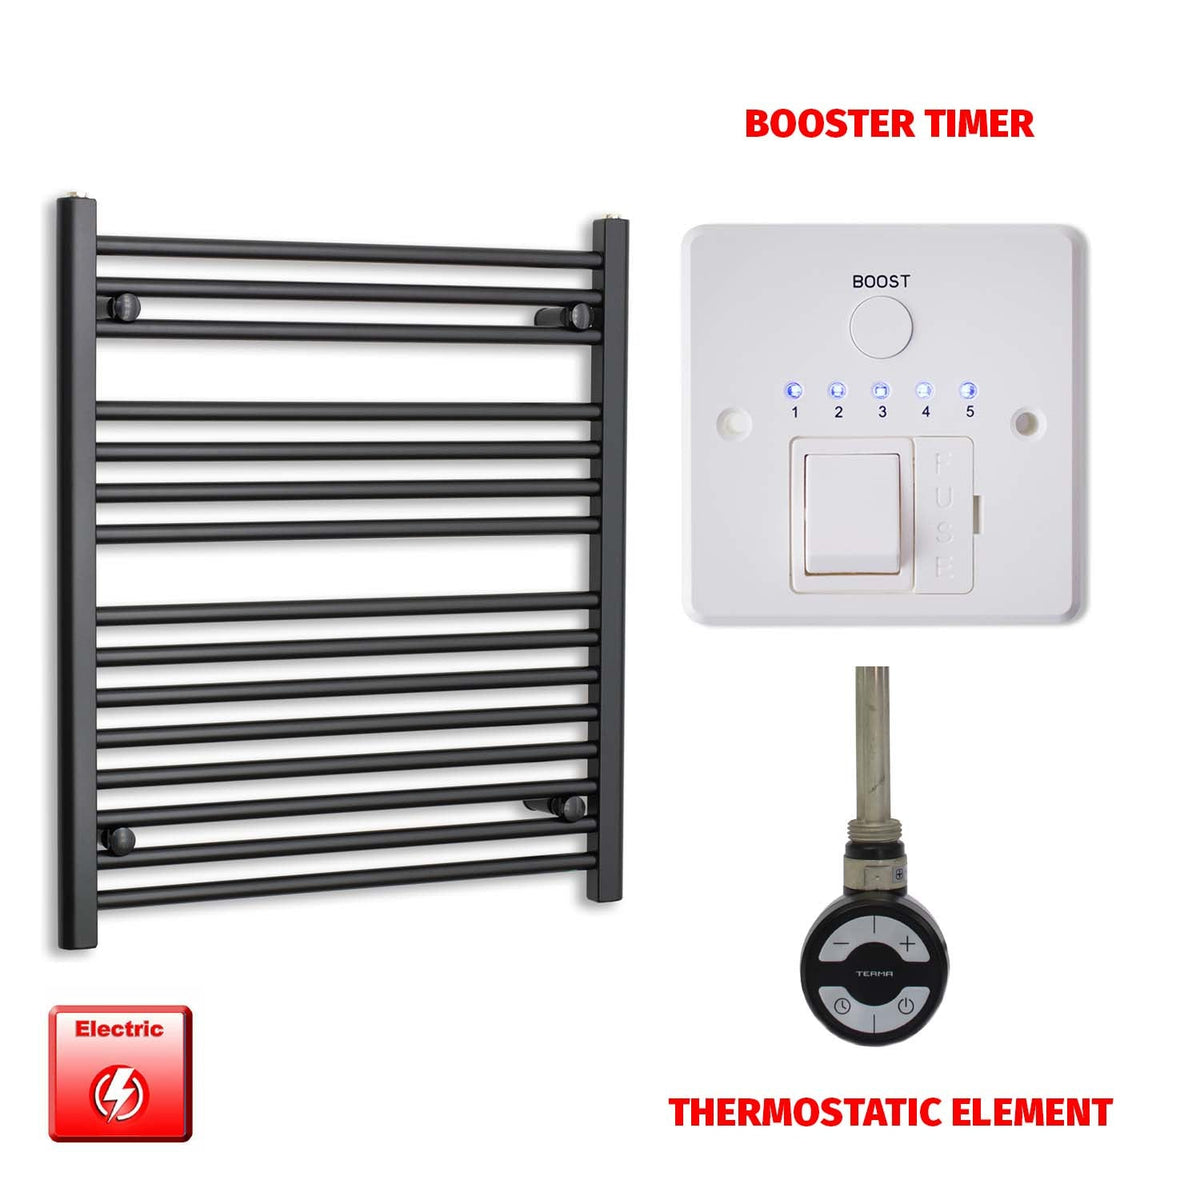 800 x 700 Flat Black Pre-Filled Electric Heated Towel Radiator HTR MOA Thermostatic Booster Timer